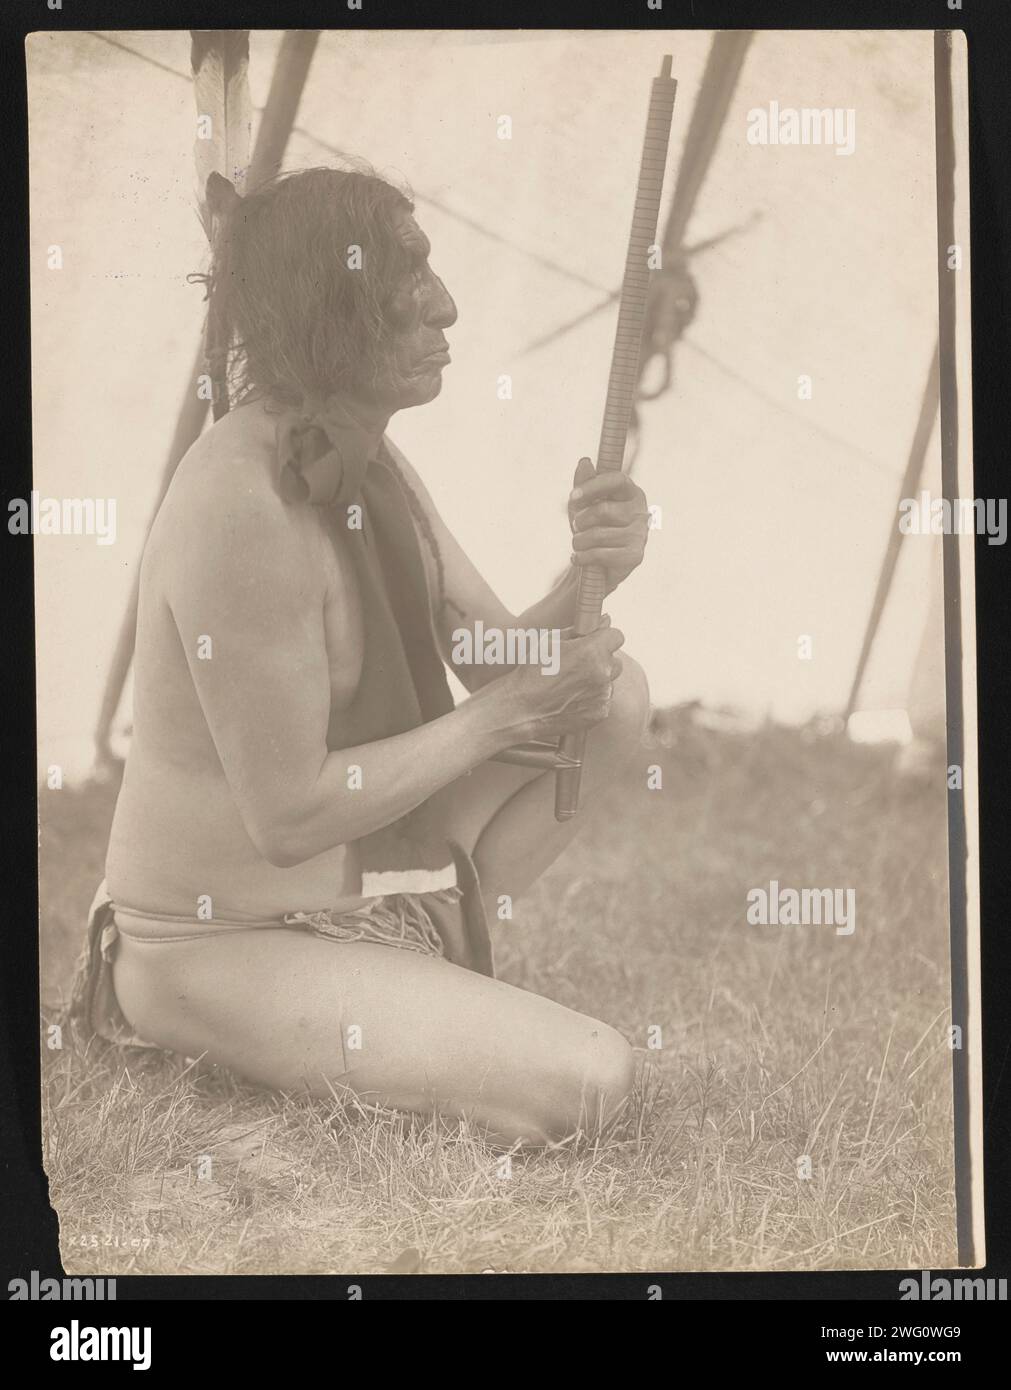 Slow Bull, 1907. Photograph shows three-quarter portrait of Slow Bull inside tipi, facing right, sitting in grass holding a pipe. Stock Photo